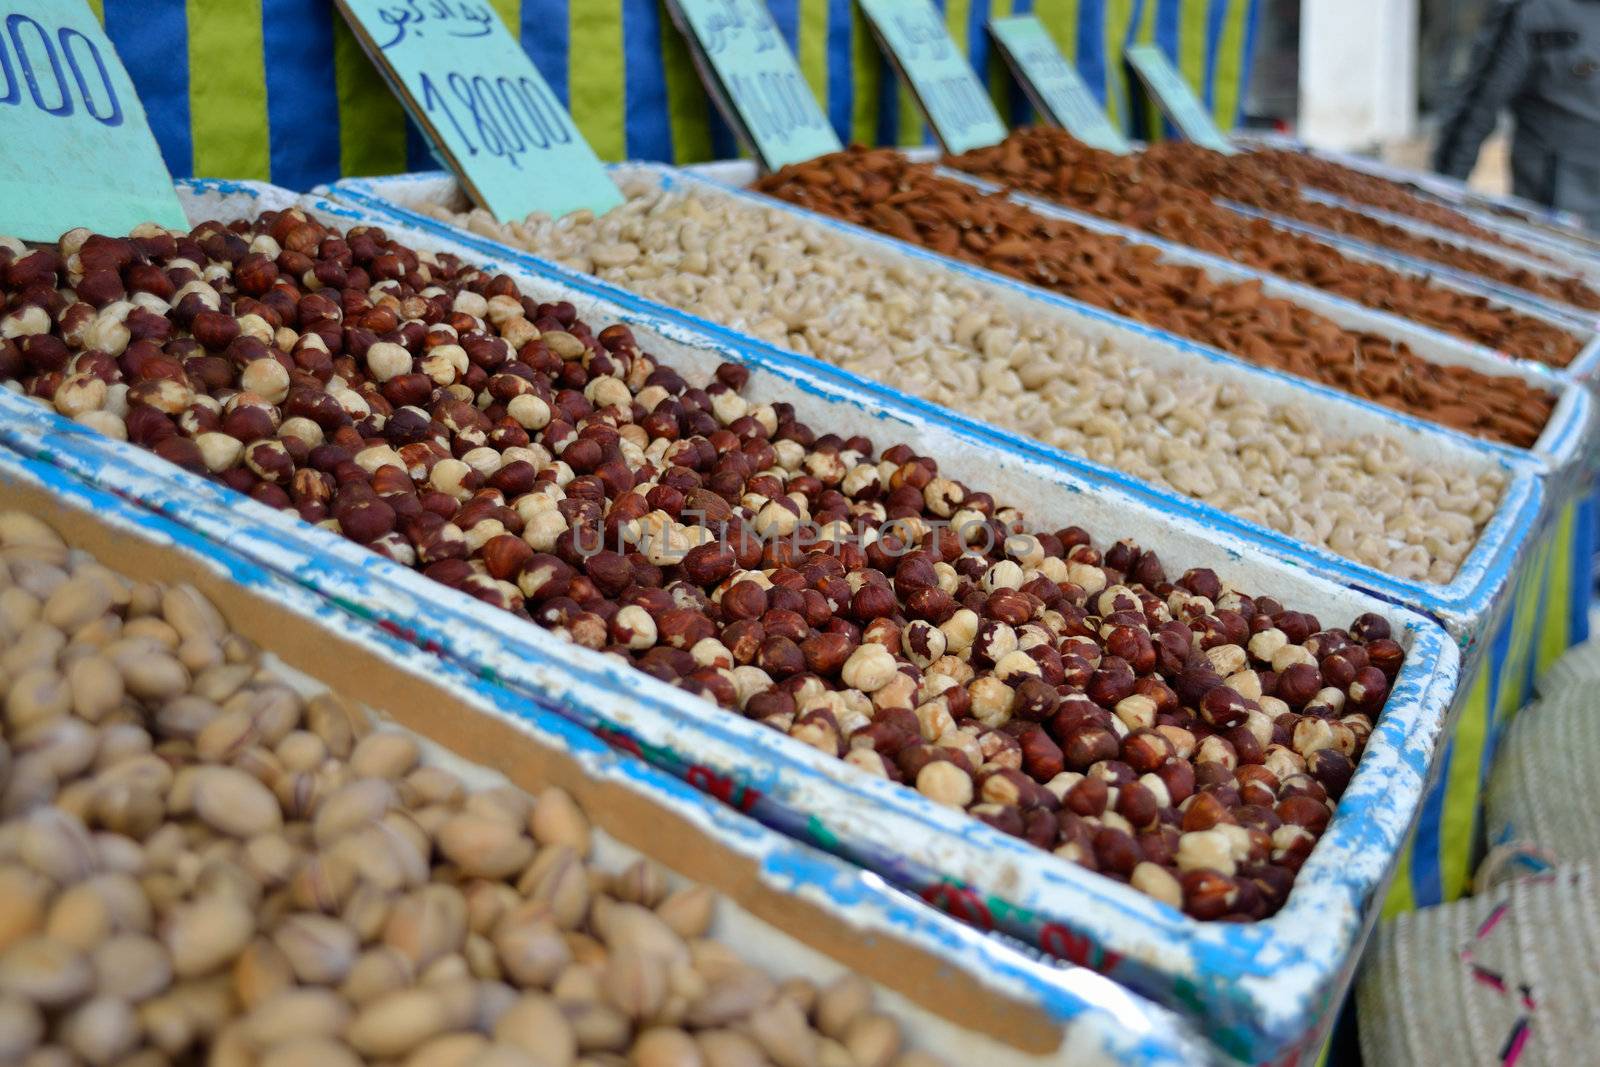 Hazelnuts and other nuts at tunisian market